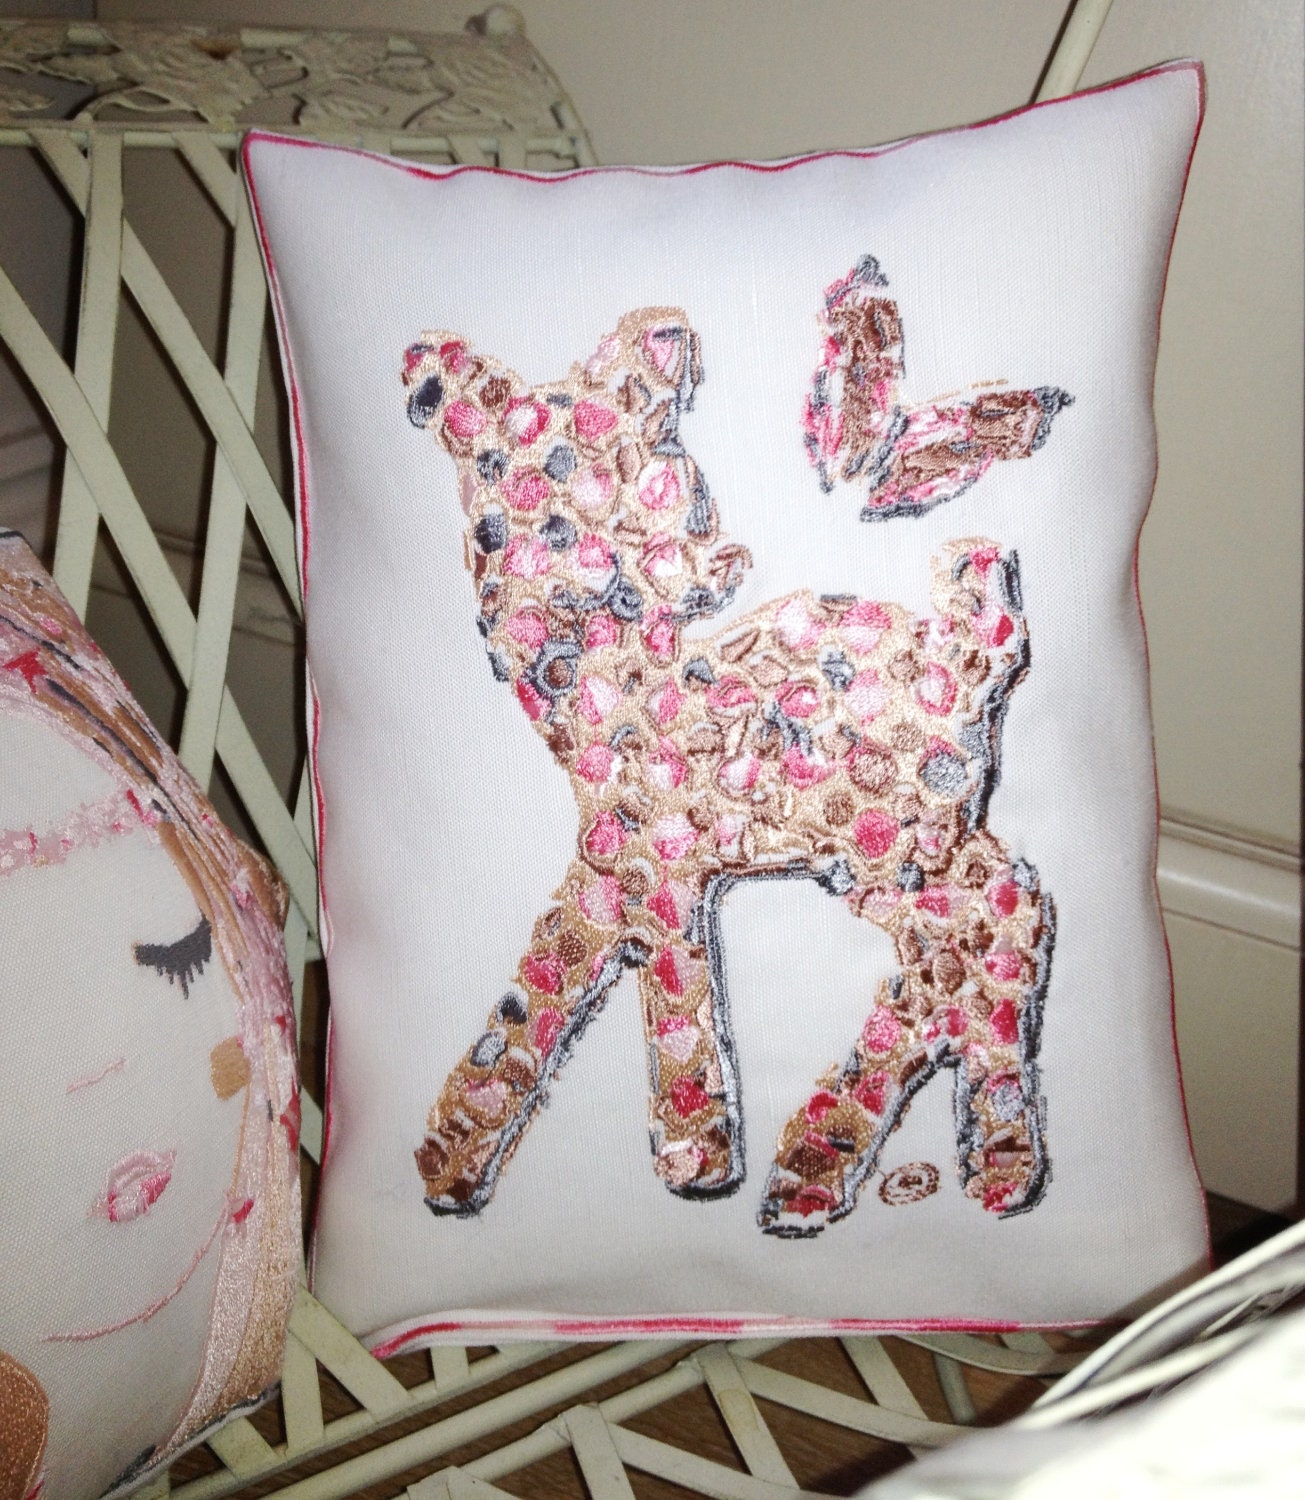 Deanna the Deer and Buttercup the Butterfly -Artistic Textured Embroidery - Throw Cushion